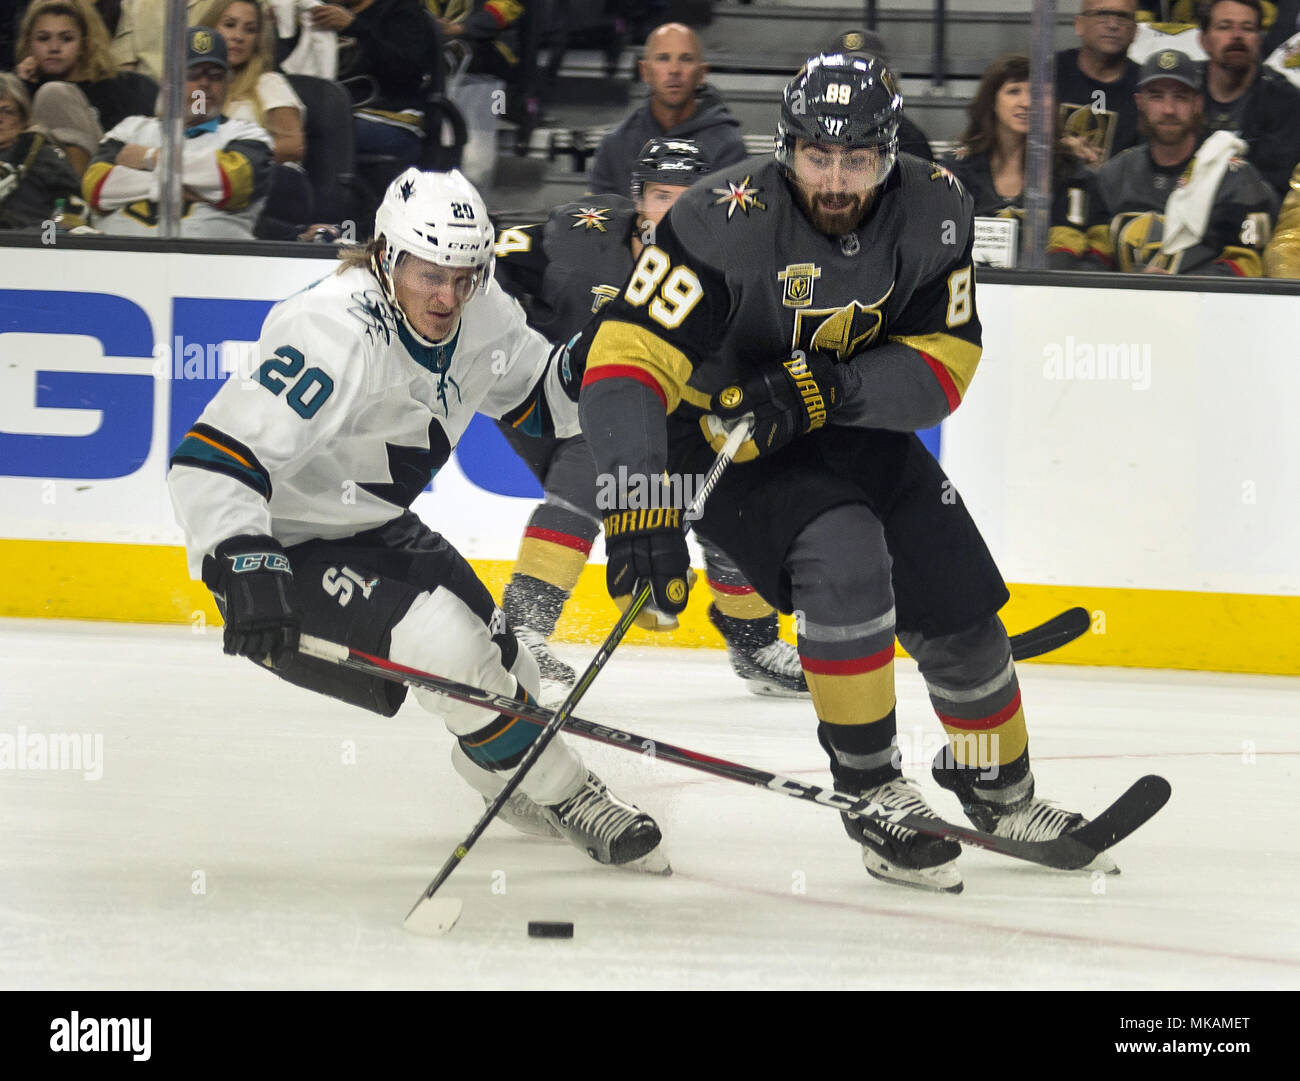 Las Vegas, Nevada, USA. 4th May, 2018. Vegas Golden Knights right wing Alex Tuch (89) and San Jose Sharks left wing Marcus Sorensen (20) work for control of the puck during the 5th playoff game of their NHL playoff series at the T-Mobile Arena Friday, May 4, 2018, in Las Vegas. Credit: L.E. Baskow/ZUMA Wire/Alamy Live News Stock Photo